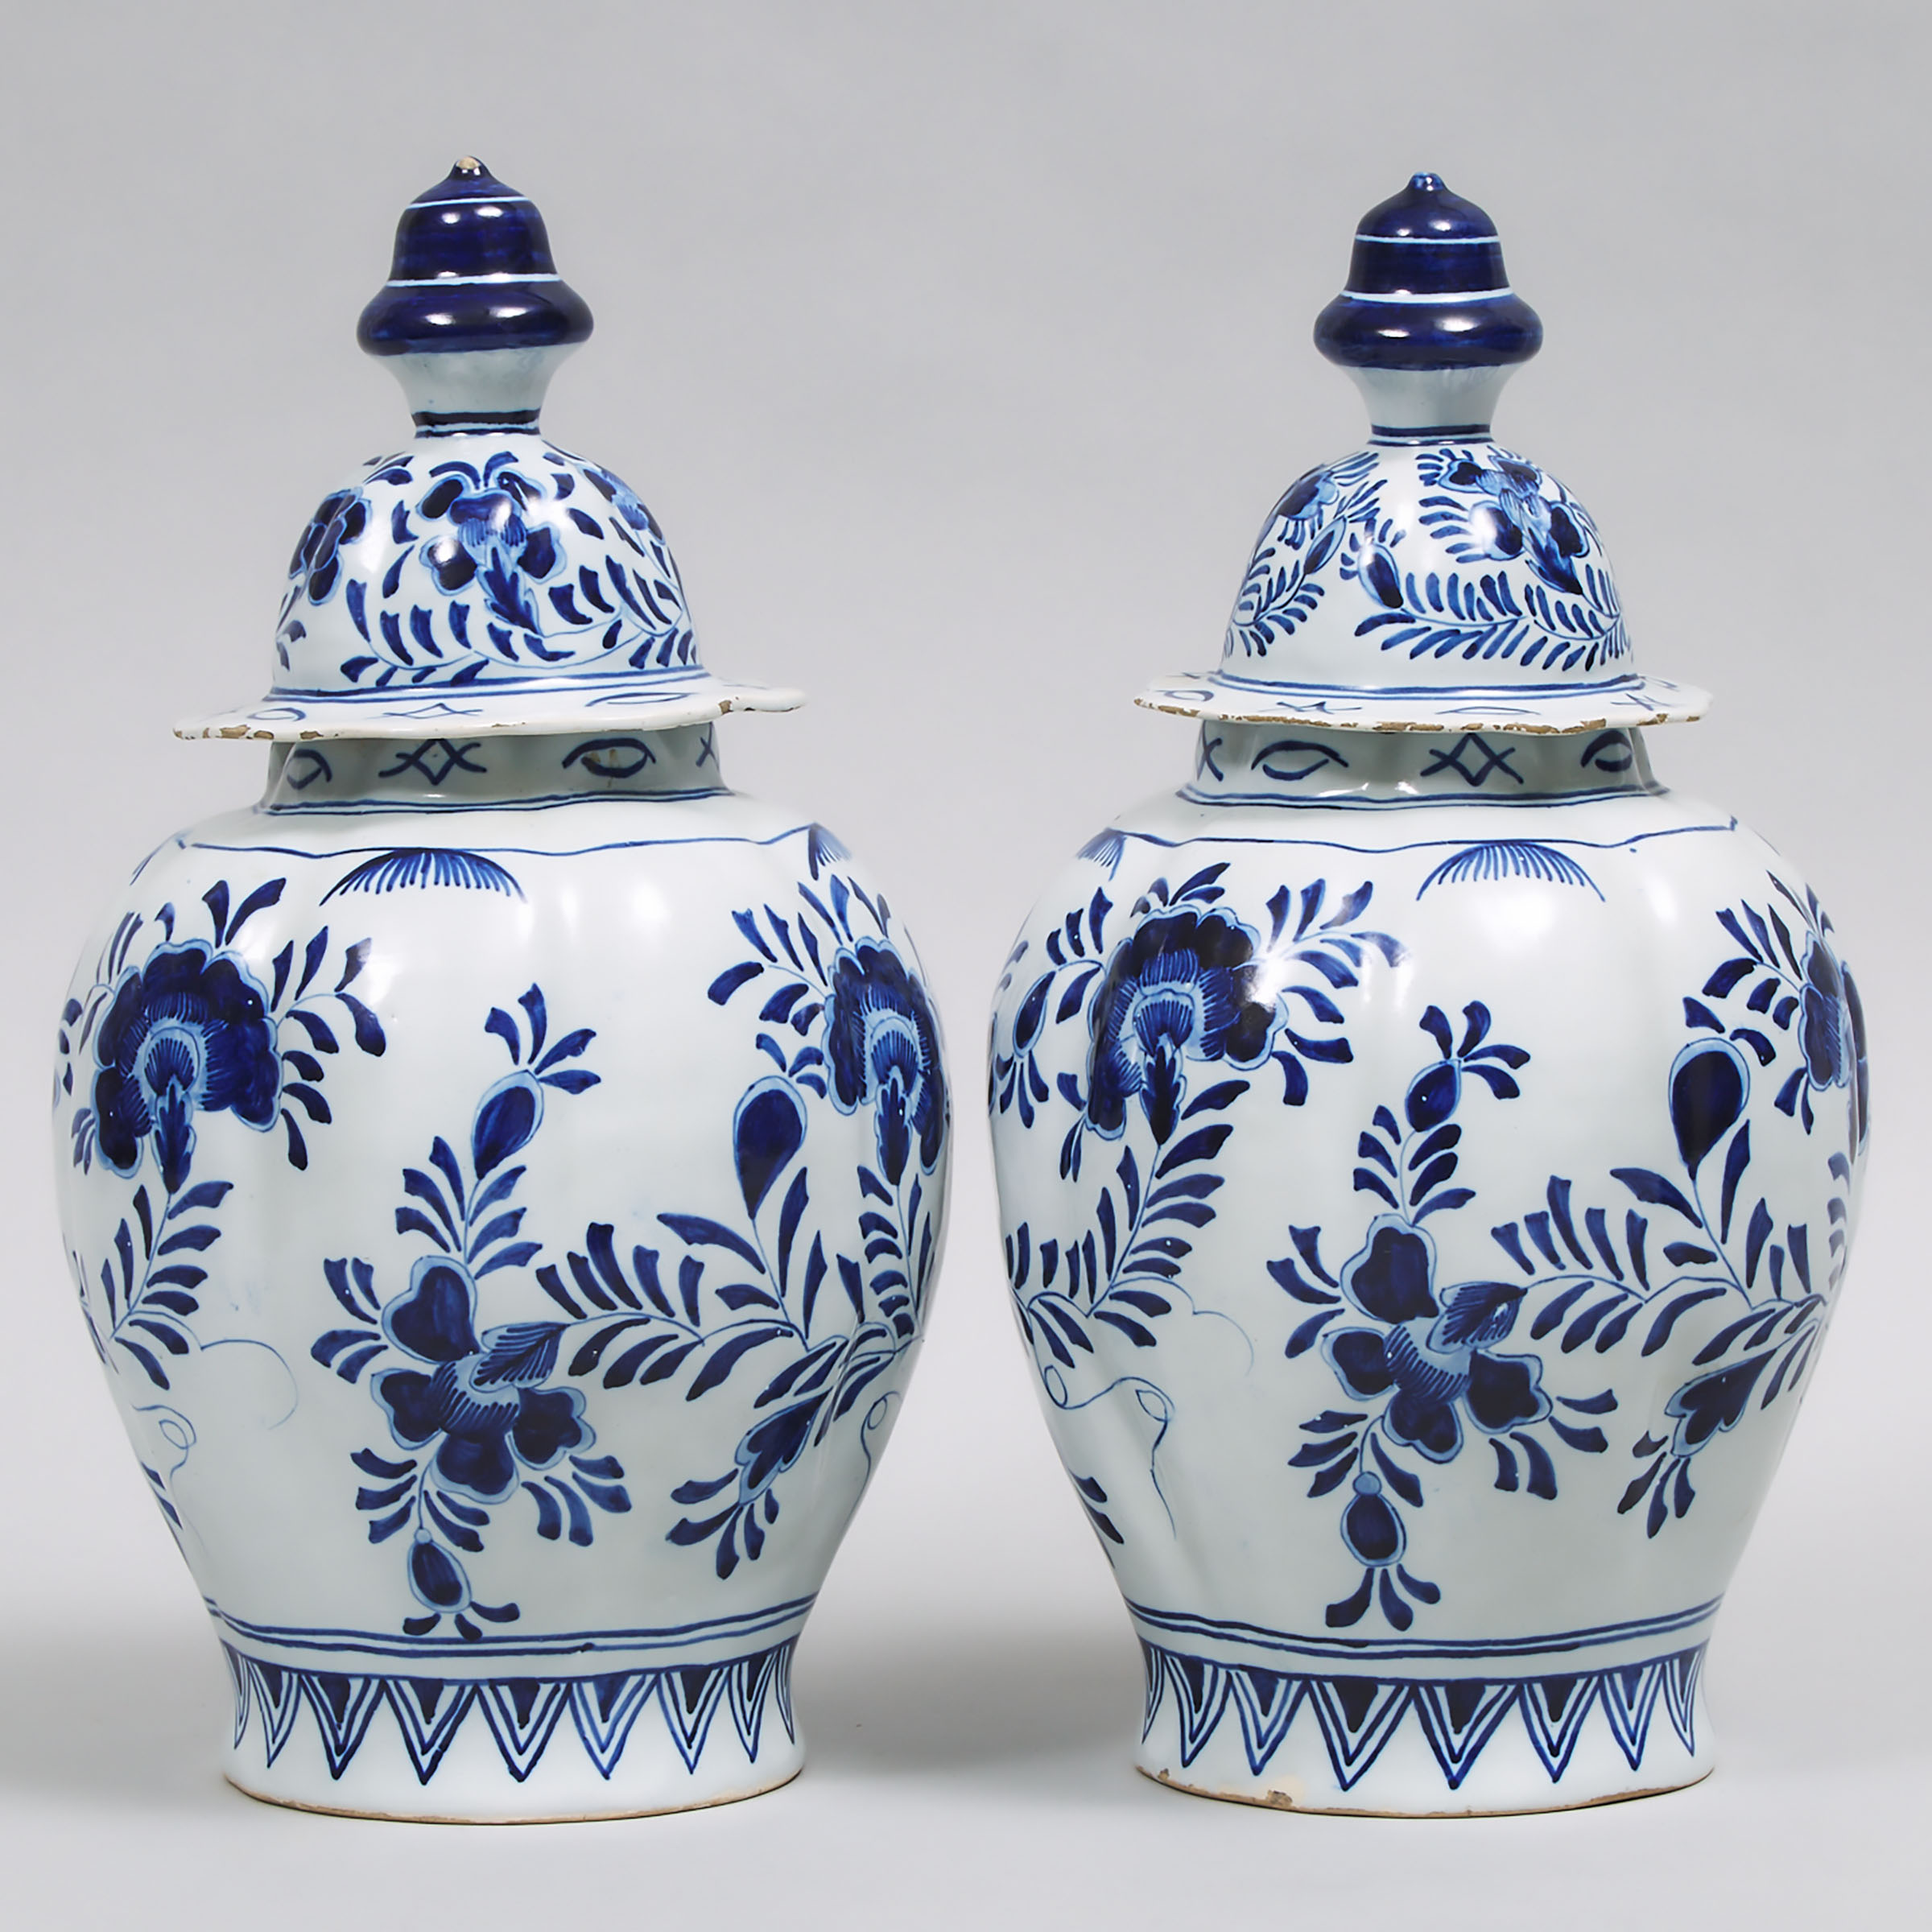 Pair of Delft Blue Painted Lobed Baluster Vases and Covers, late 18th/19th century